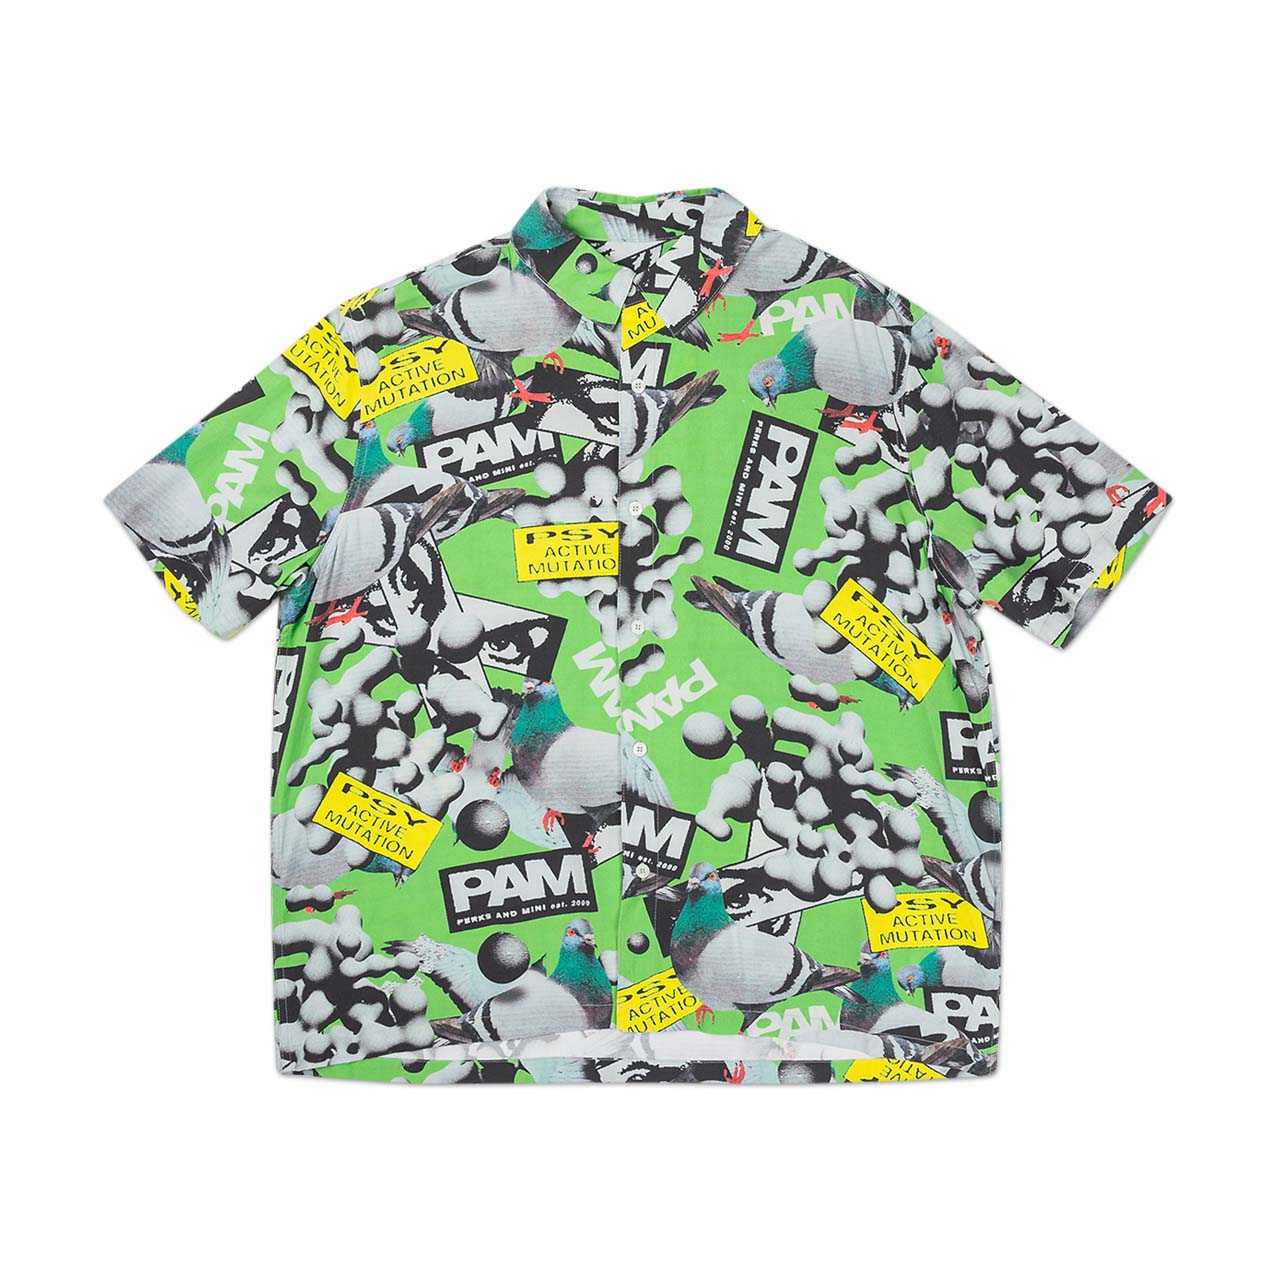 perks and mini collage short sleeve shirt (green) - 3597-cpdg - a.plus - Image - 1